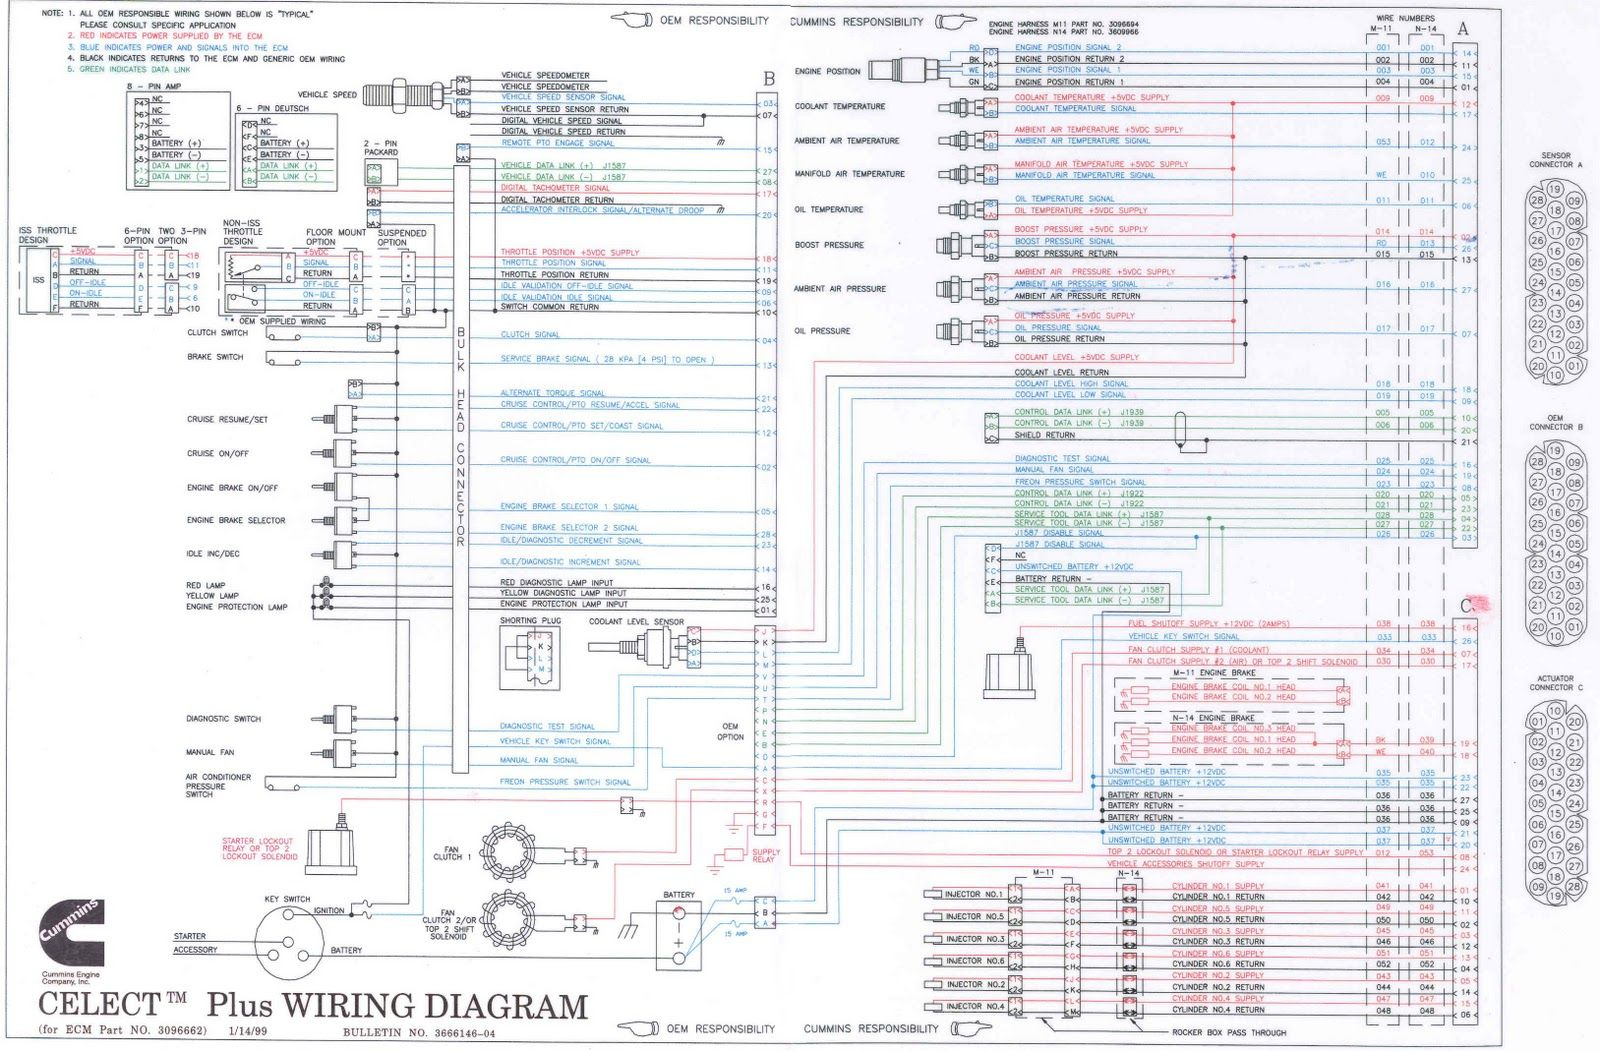 Beautiful N14 Celect Ecm Wiring Diagram Pictures Inspiration And - Ecm Wiring Diagram